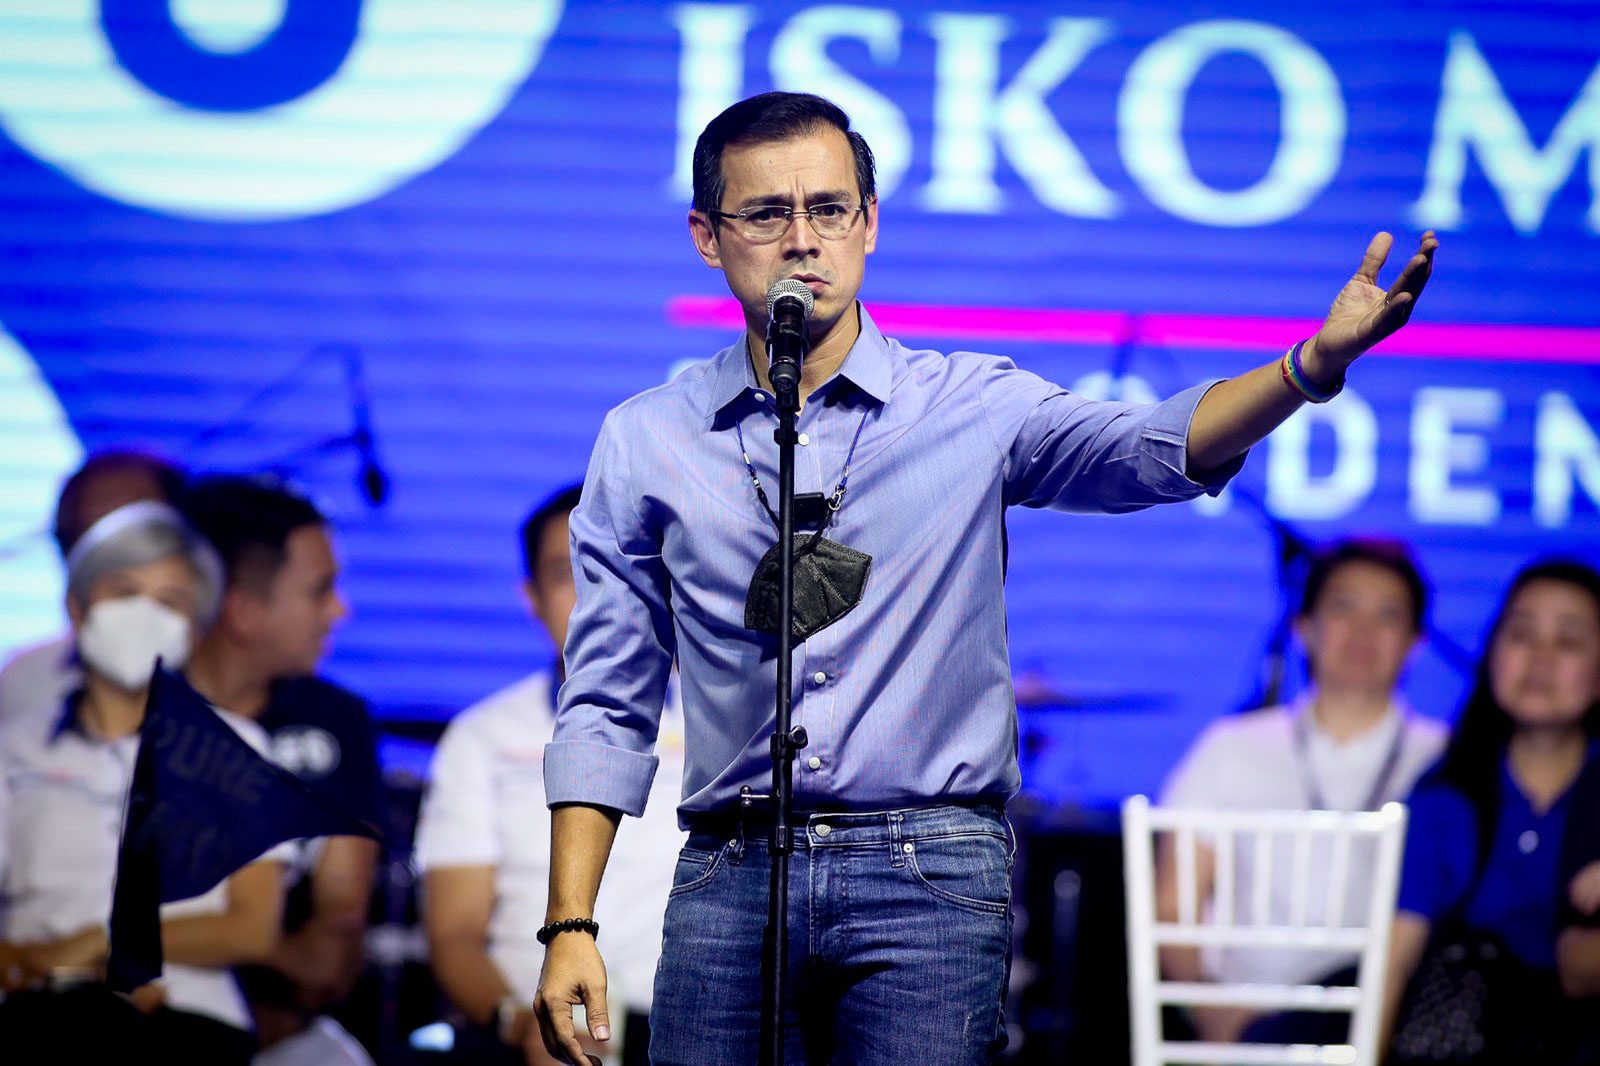 Isko Moreno’s campaign overspending case still in limbo after 5 years